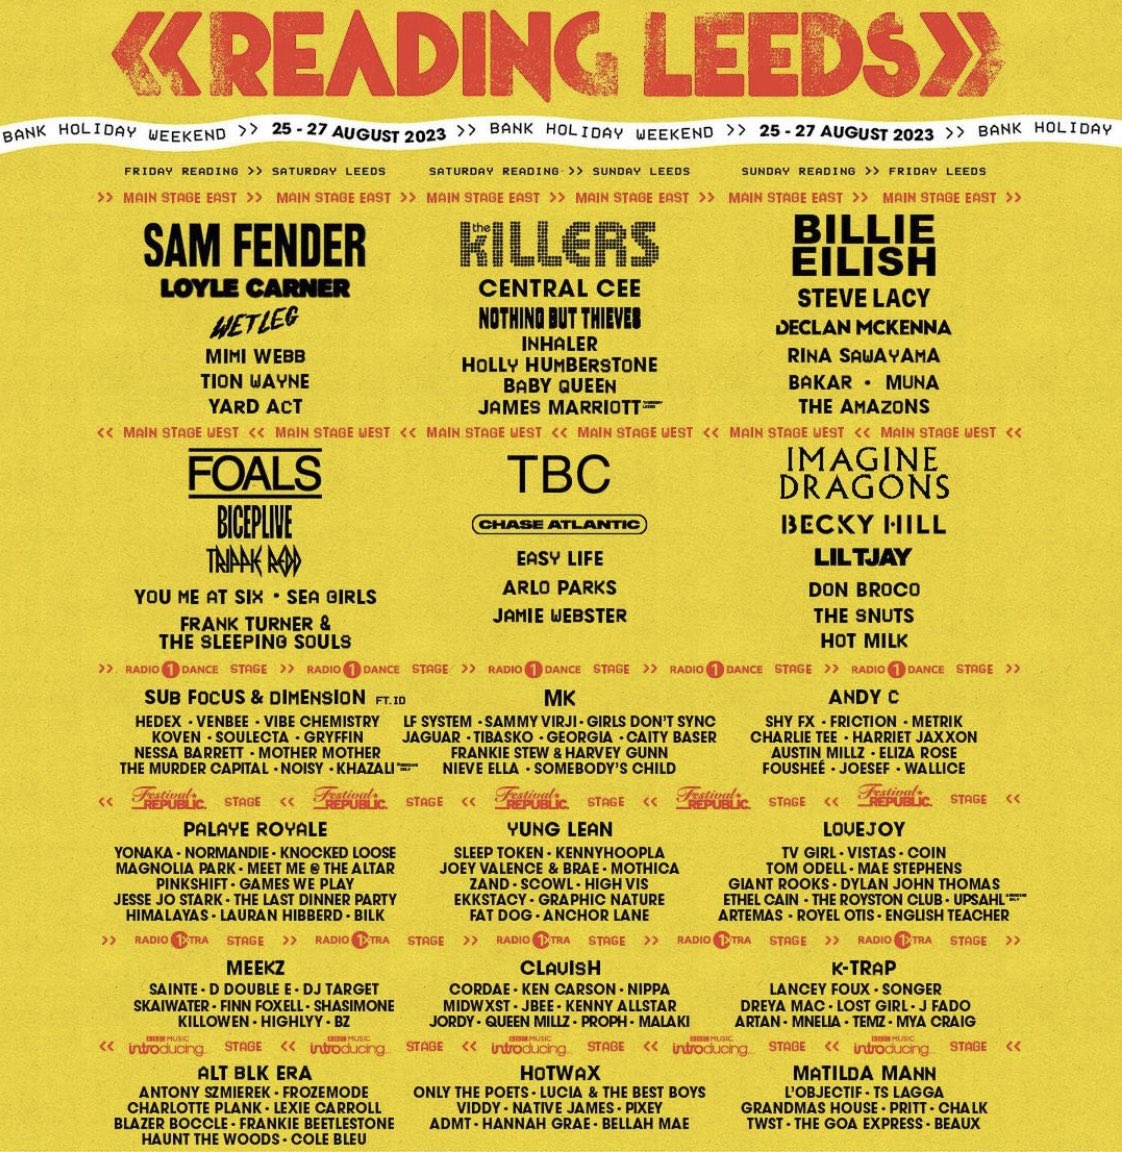 This means the absolute world to us. Thank you endlessly for believing in the music, the band and for helping dreams come true @whatanhonor @bbcintroducing @OfficialRandL 🥺 Not sure if this will ever feel real but #viddybandgotreadingandleeds 😭😭😭😭😭😭😭😭😭😭😭